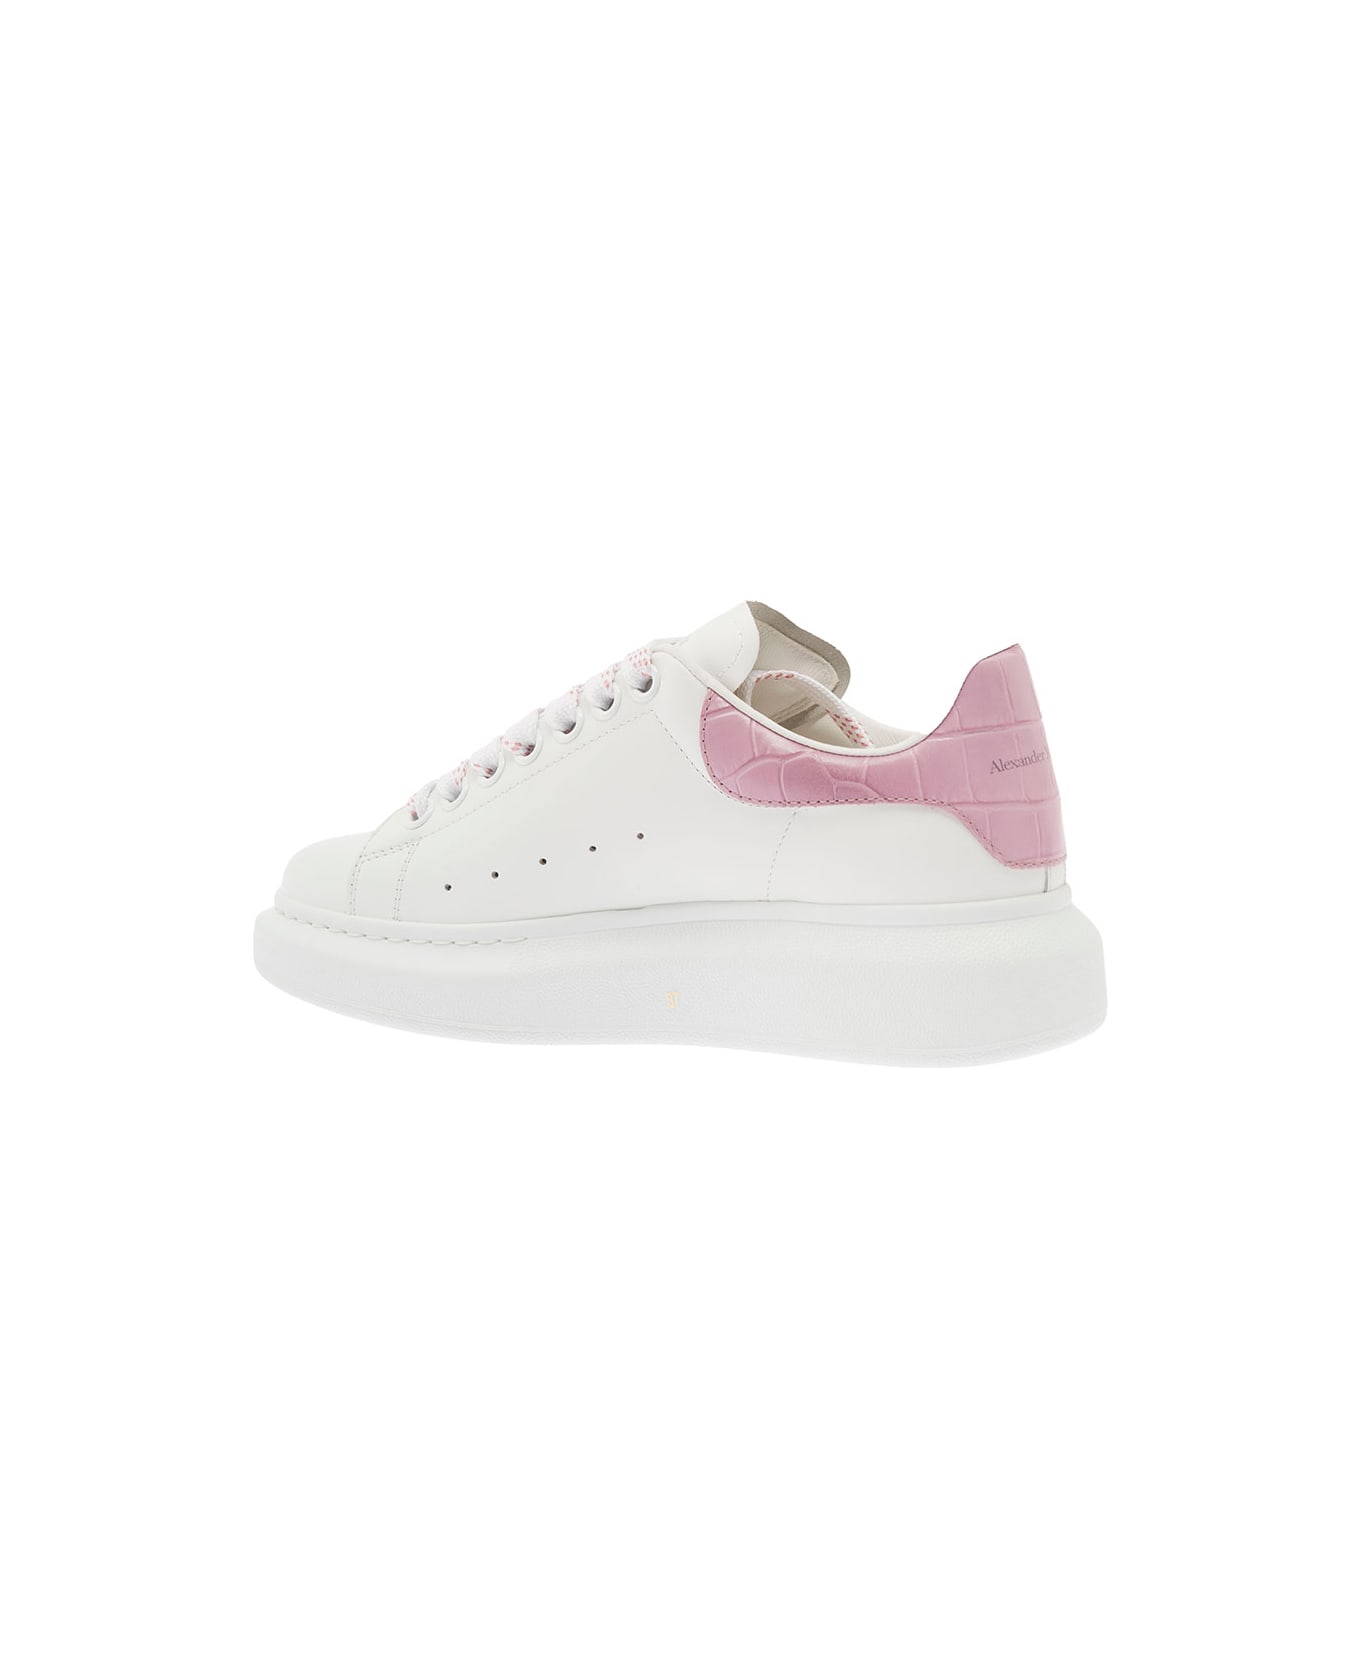 Alexander McQueen White 'larry' Low Top Sneakers With Croco Heel Counter In Calf Leather - White